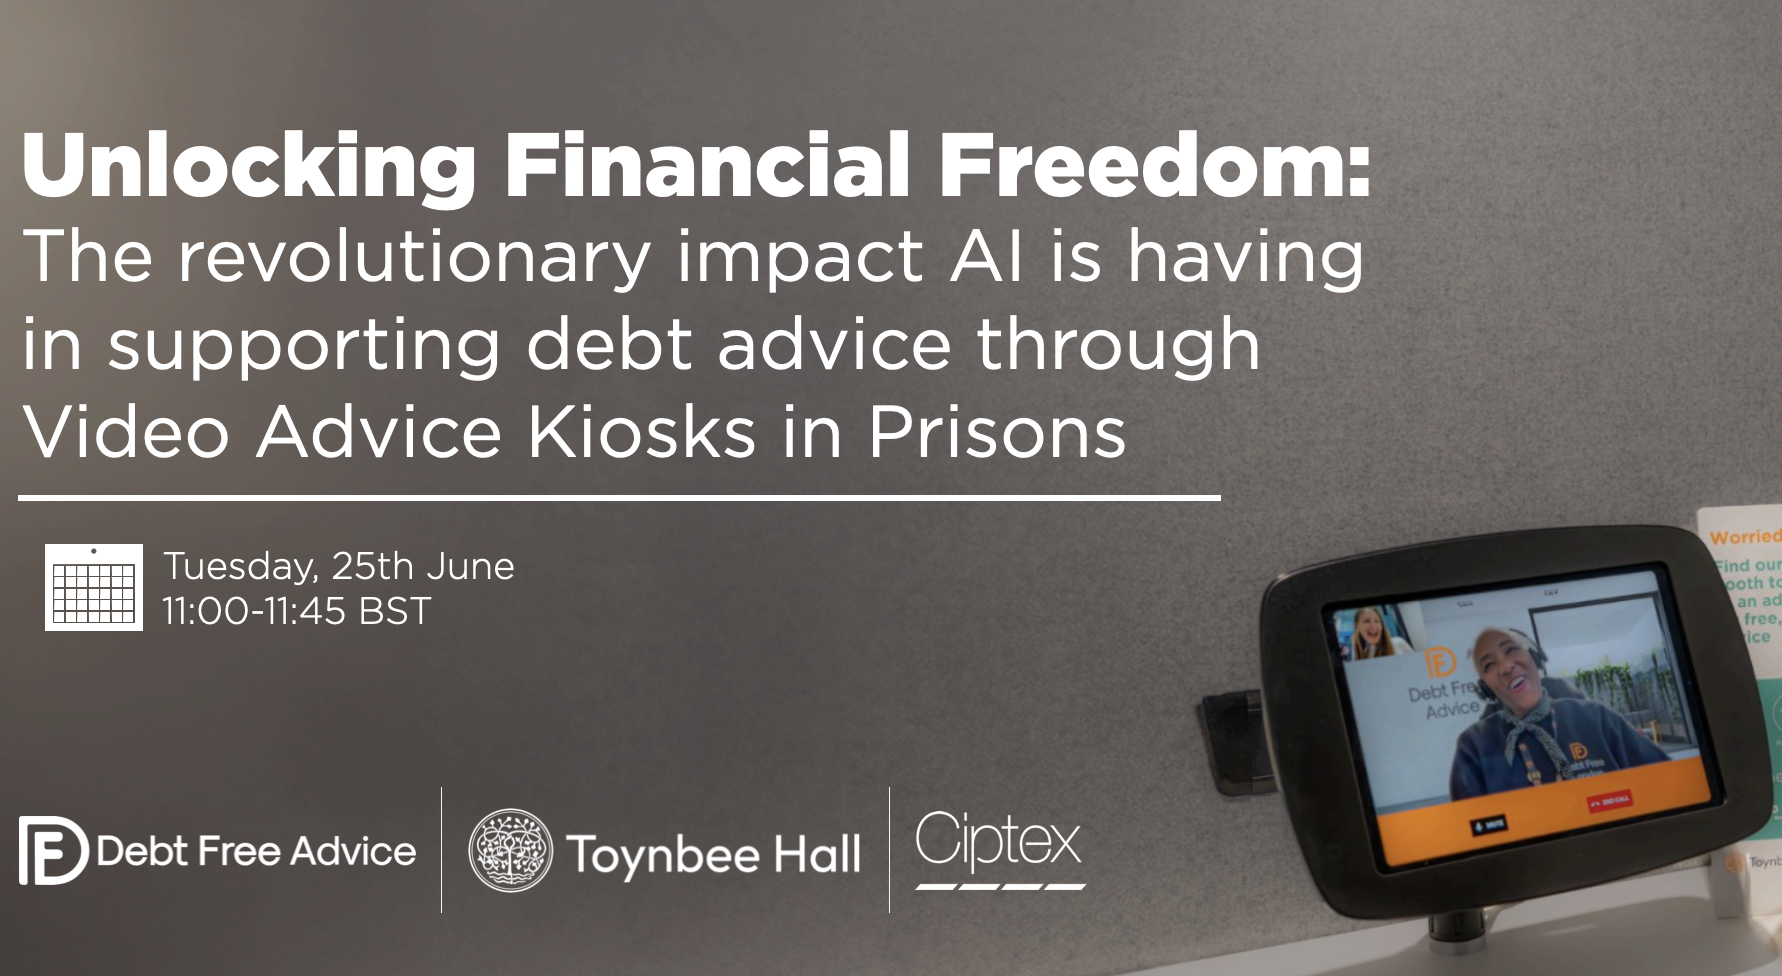 Unlocking financial freedom: The revolutionary impact AI is having in supporting debt advice through video advice kiosks in prisons. Tuesday 25th June, 11:00-11:45 BST.